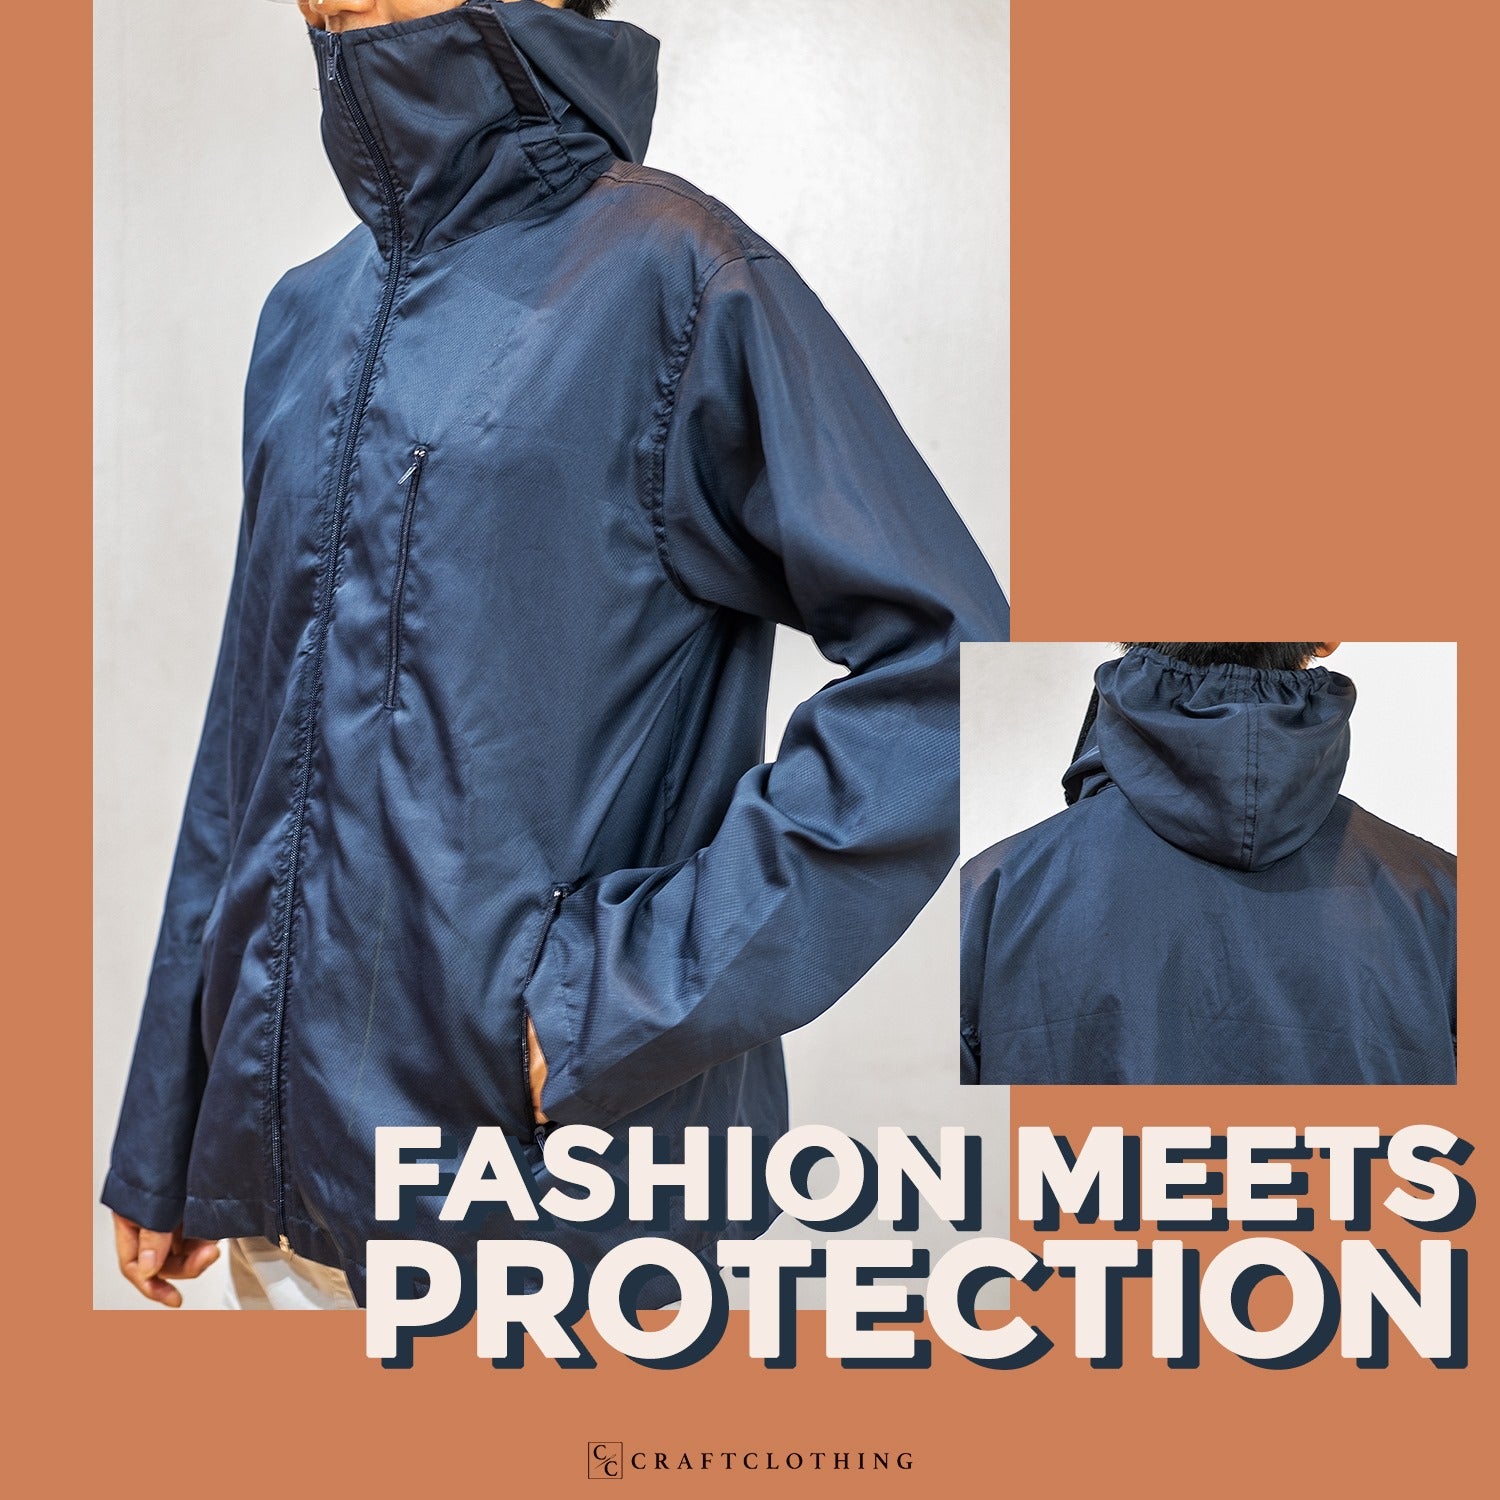 FASHION MEETS PROTECTION